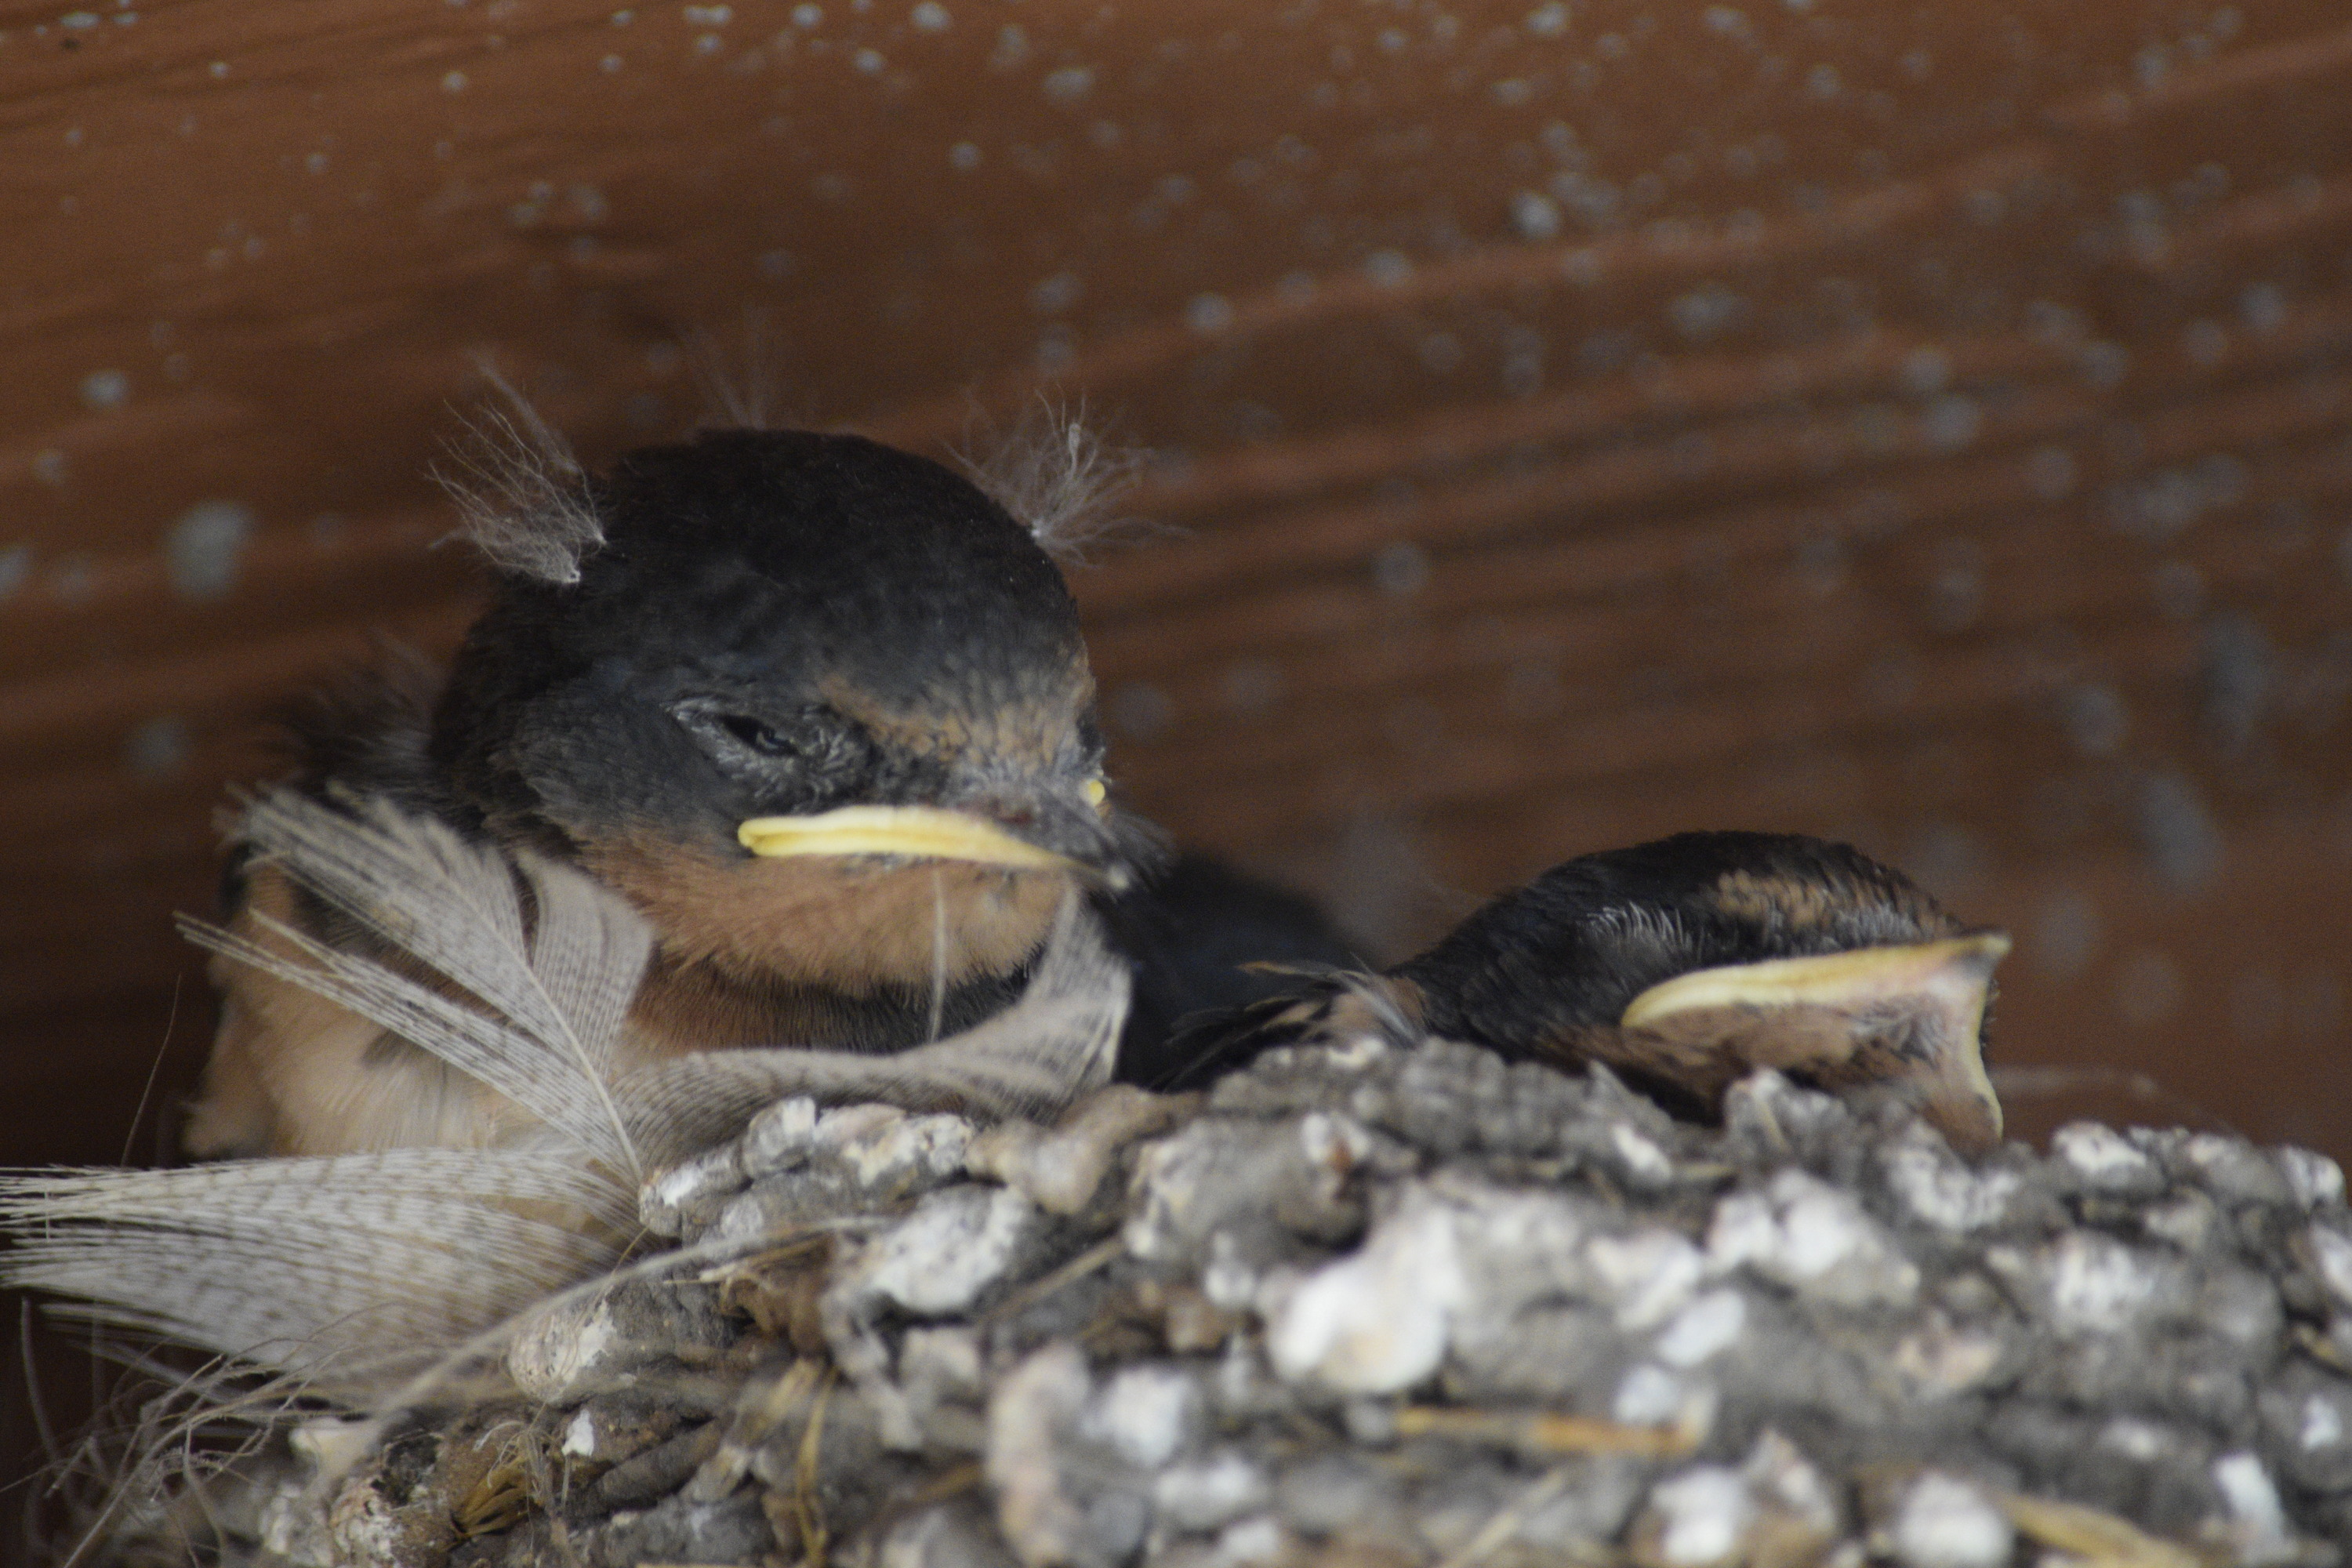 Two heads of baby barn swallows are seen on top of a gray & white nest with a red wall visible behind them.